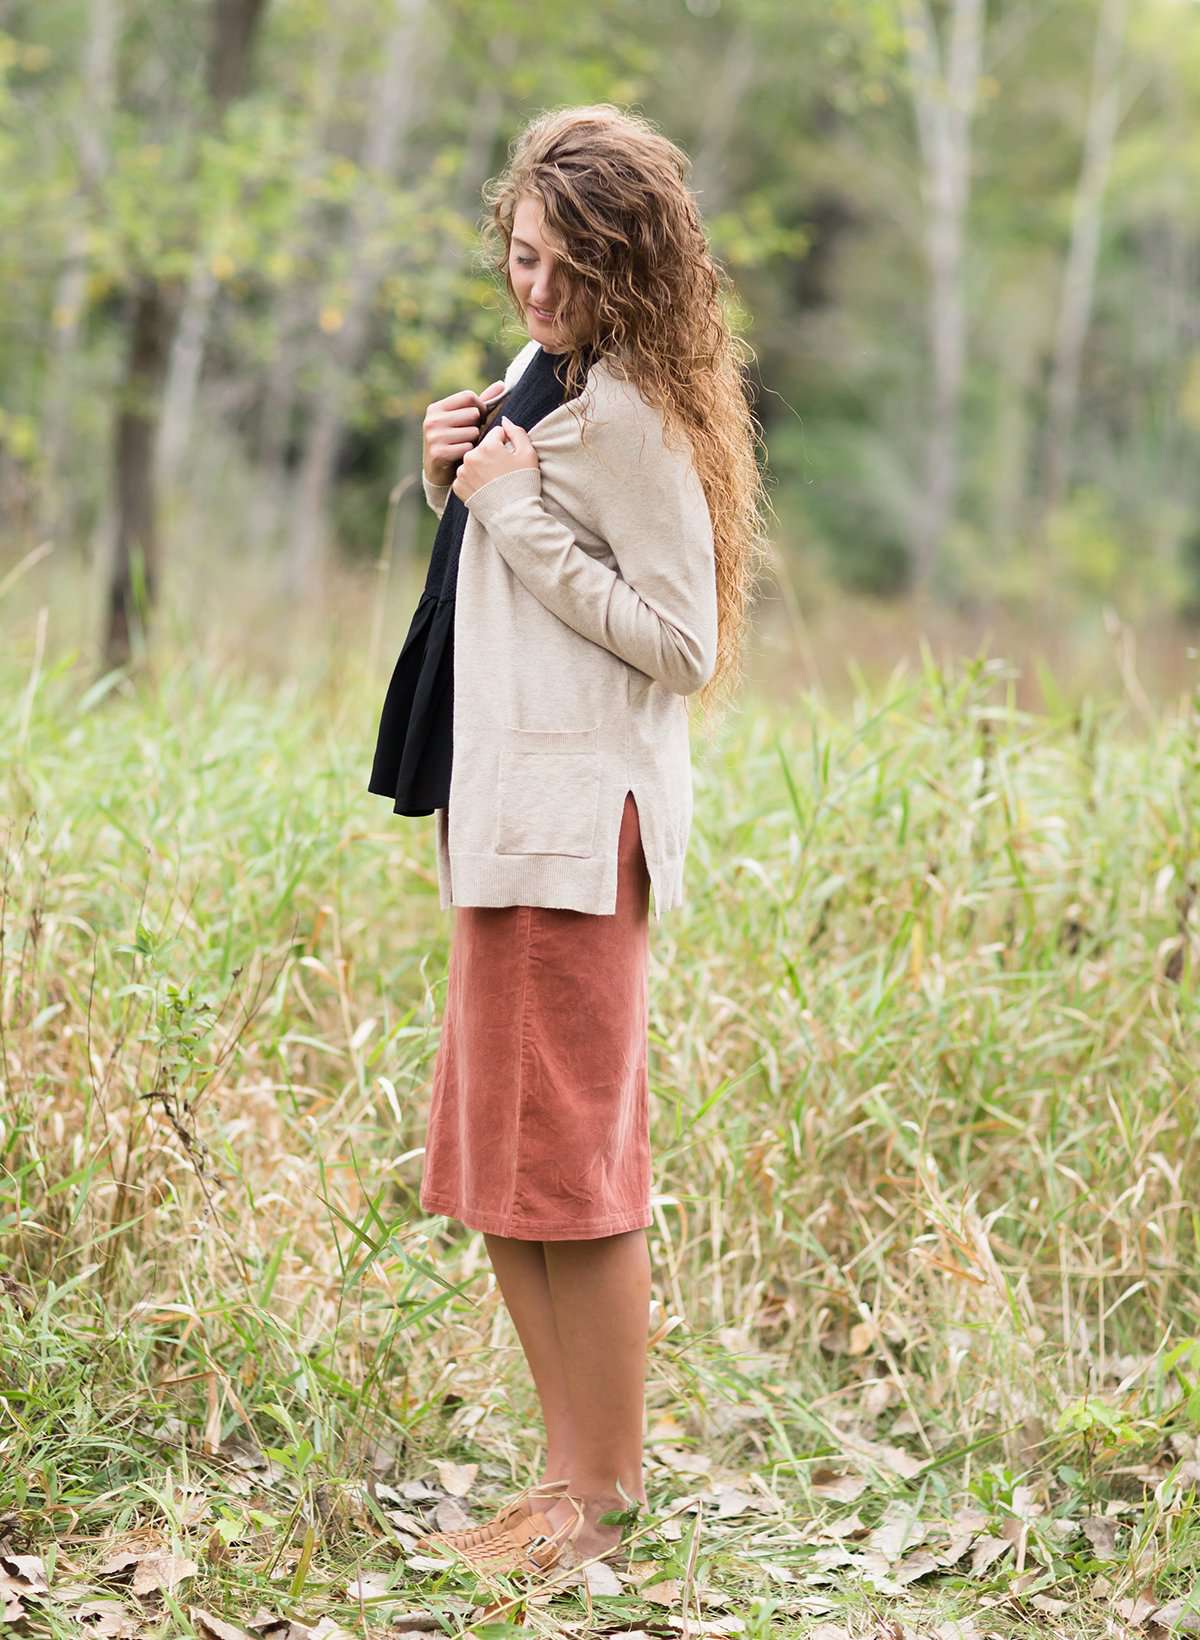 Knit cardigan, in black, heather gray, oatmeal or mauve option. Long sleeves, front pockets and open front.